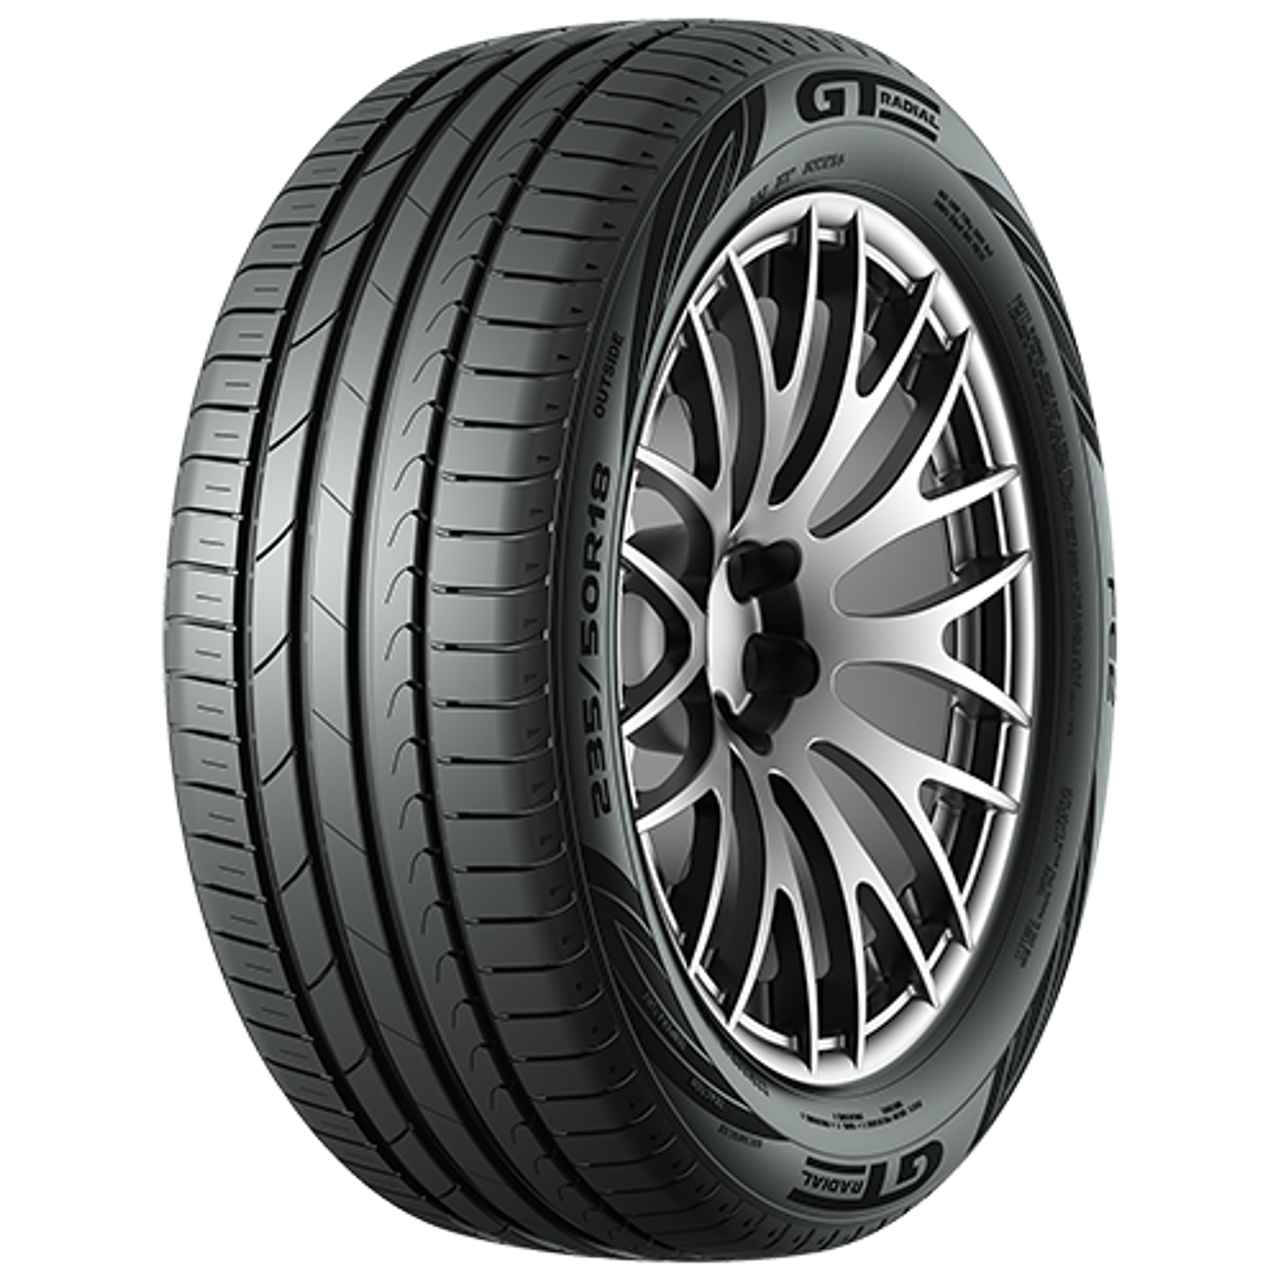 GT-RADIAL FE2 185/55R15 82H BSW